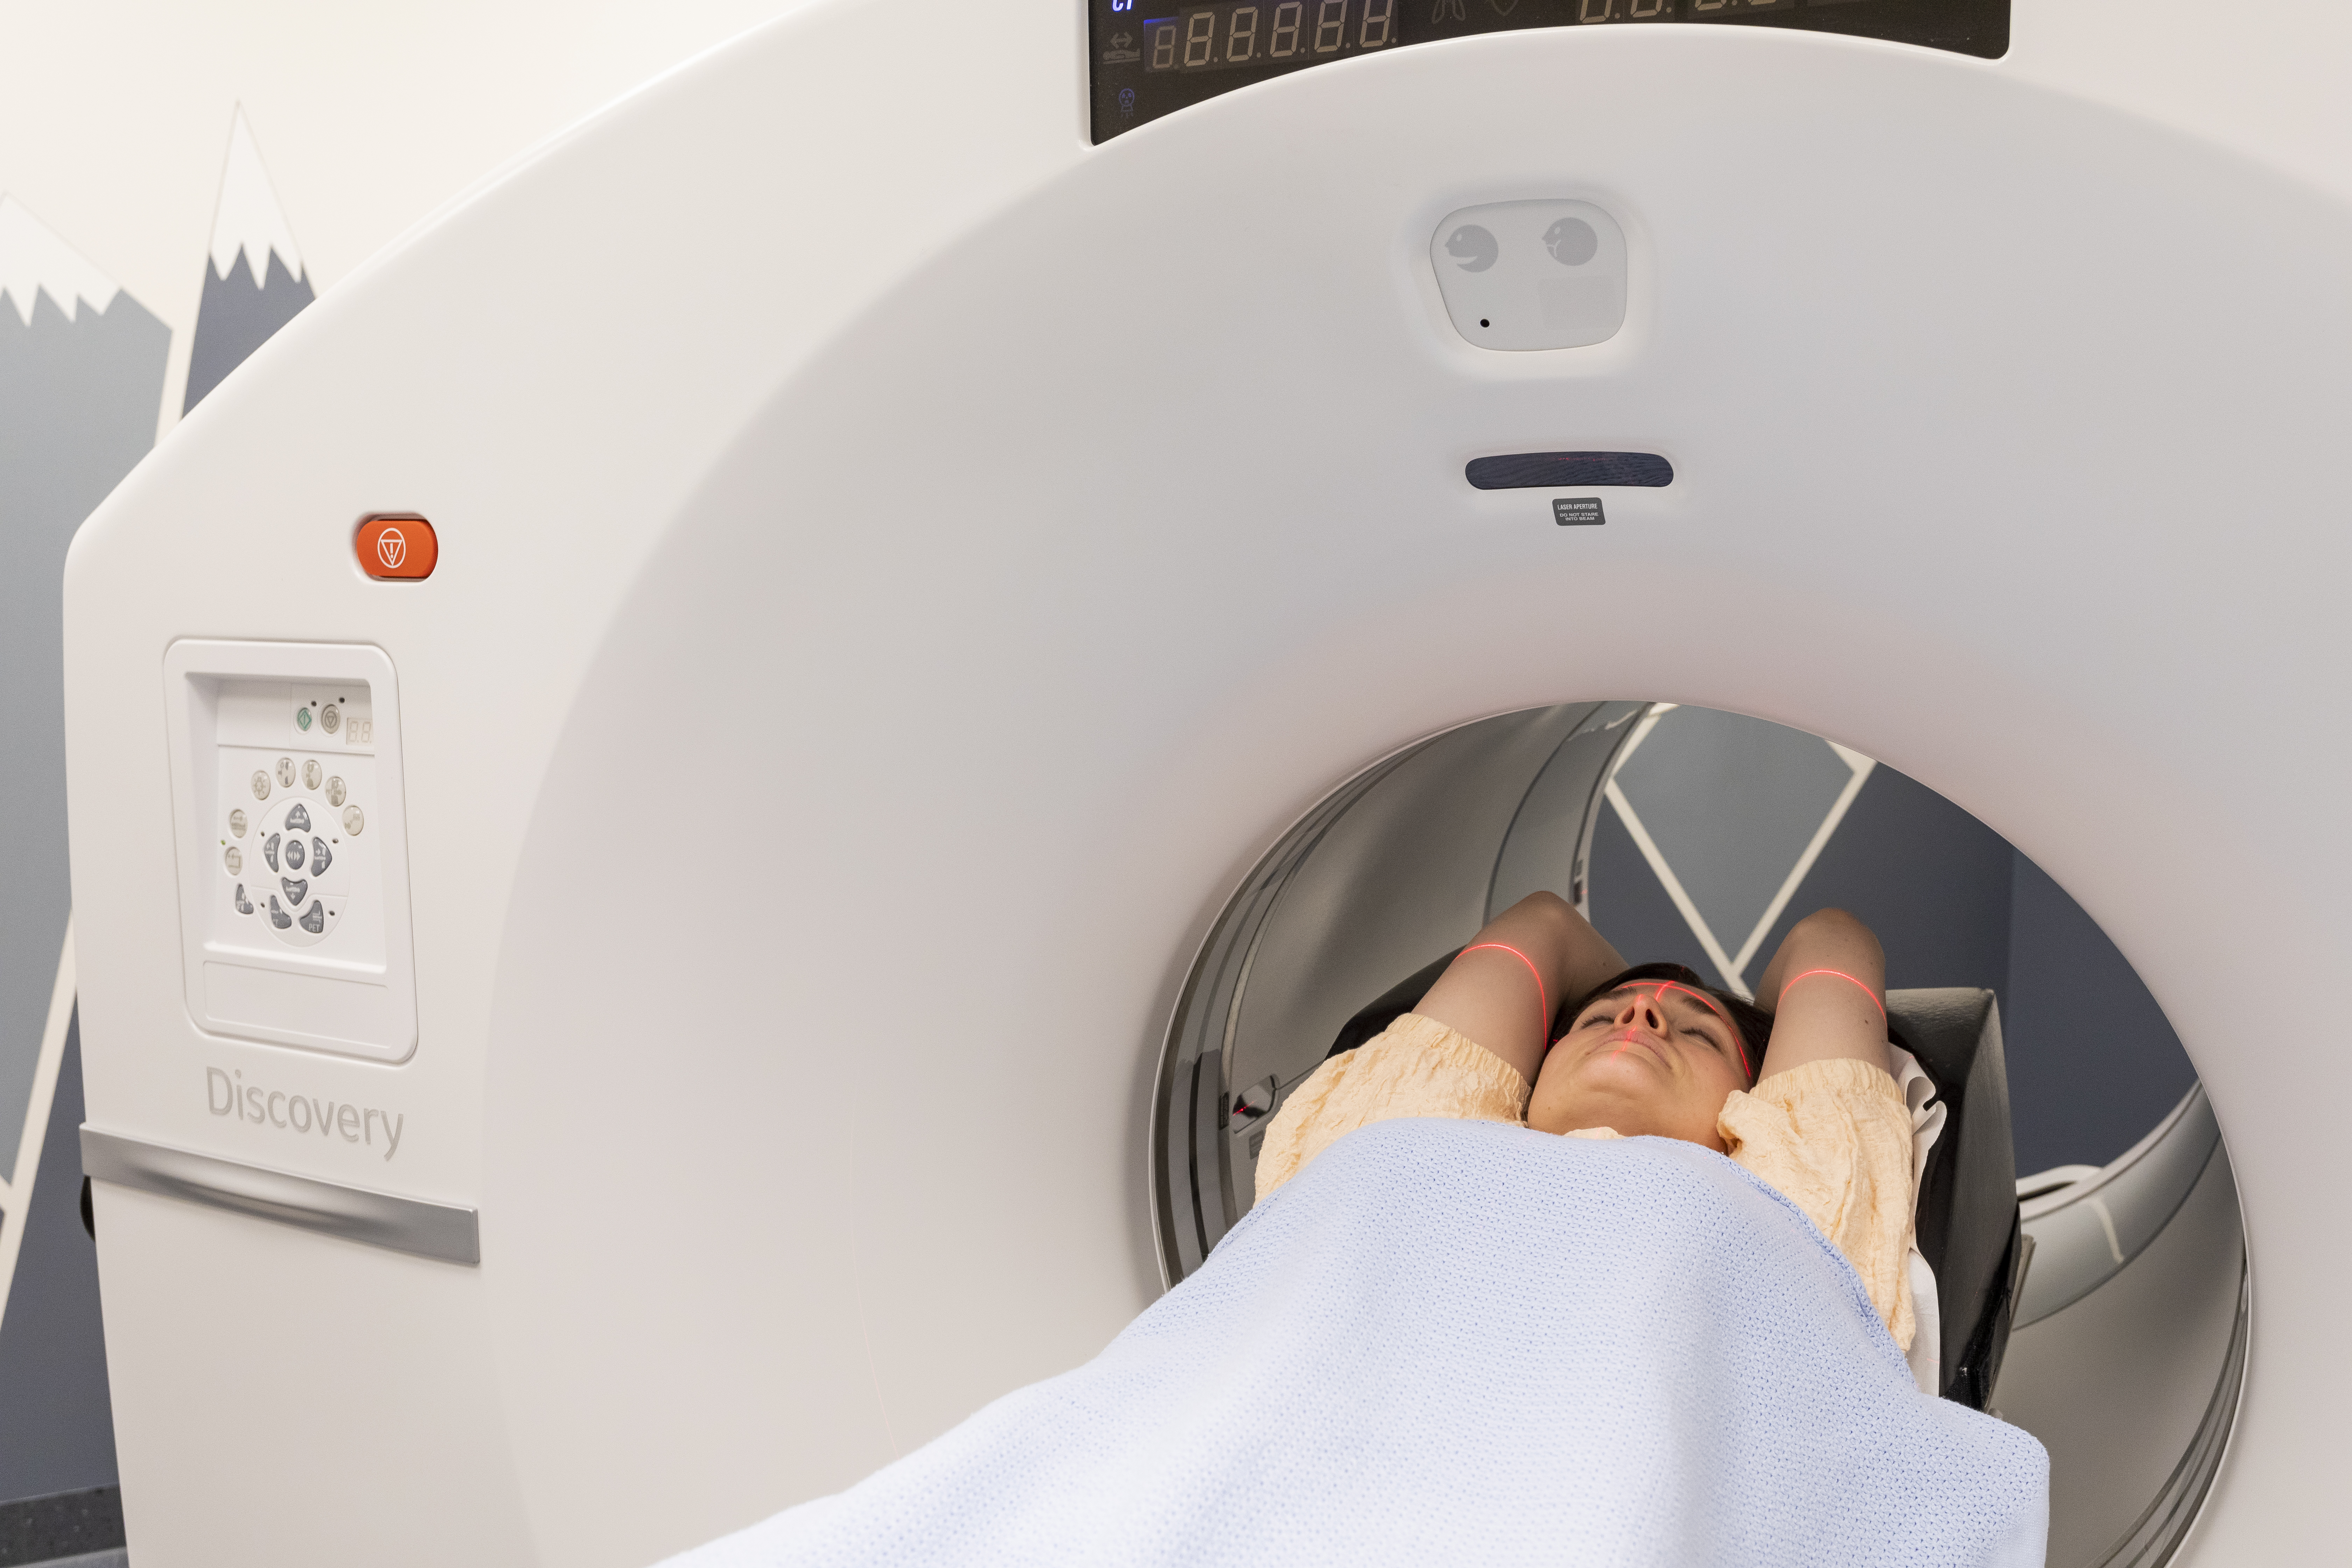 The PET/CT system has the potential to enable an exceptionally high sensitivity of 30 cps/kBq and includes a CT designed to allow TrueFidelity™ deep-learning image reconstruction to enable image sharpness and improved noise texture.JPG